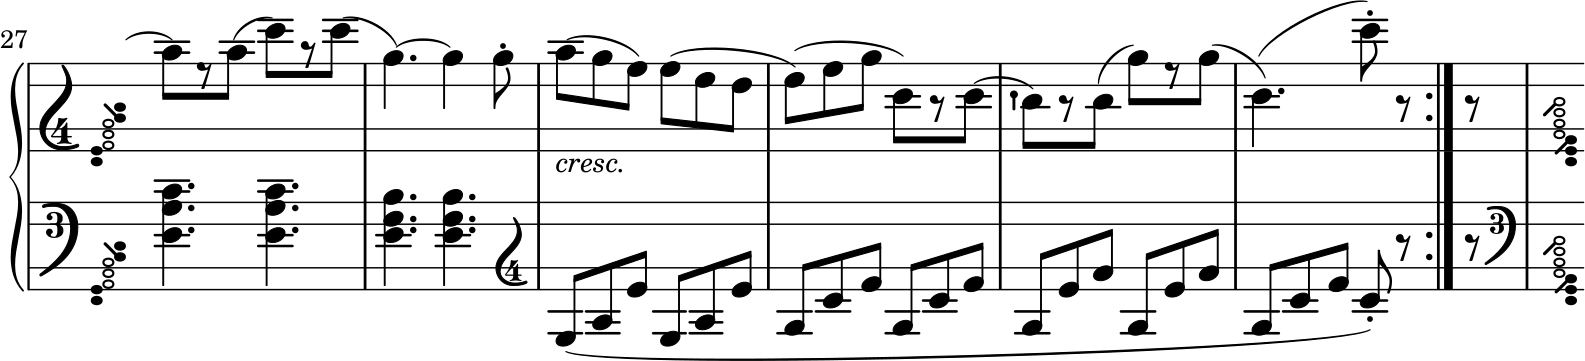 Tarantella measures 27-32 with treble clef in left hand part